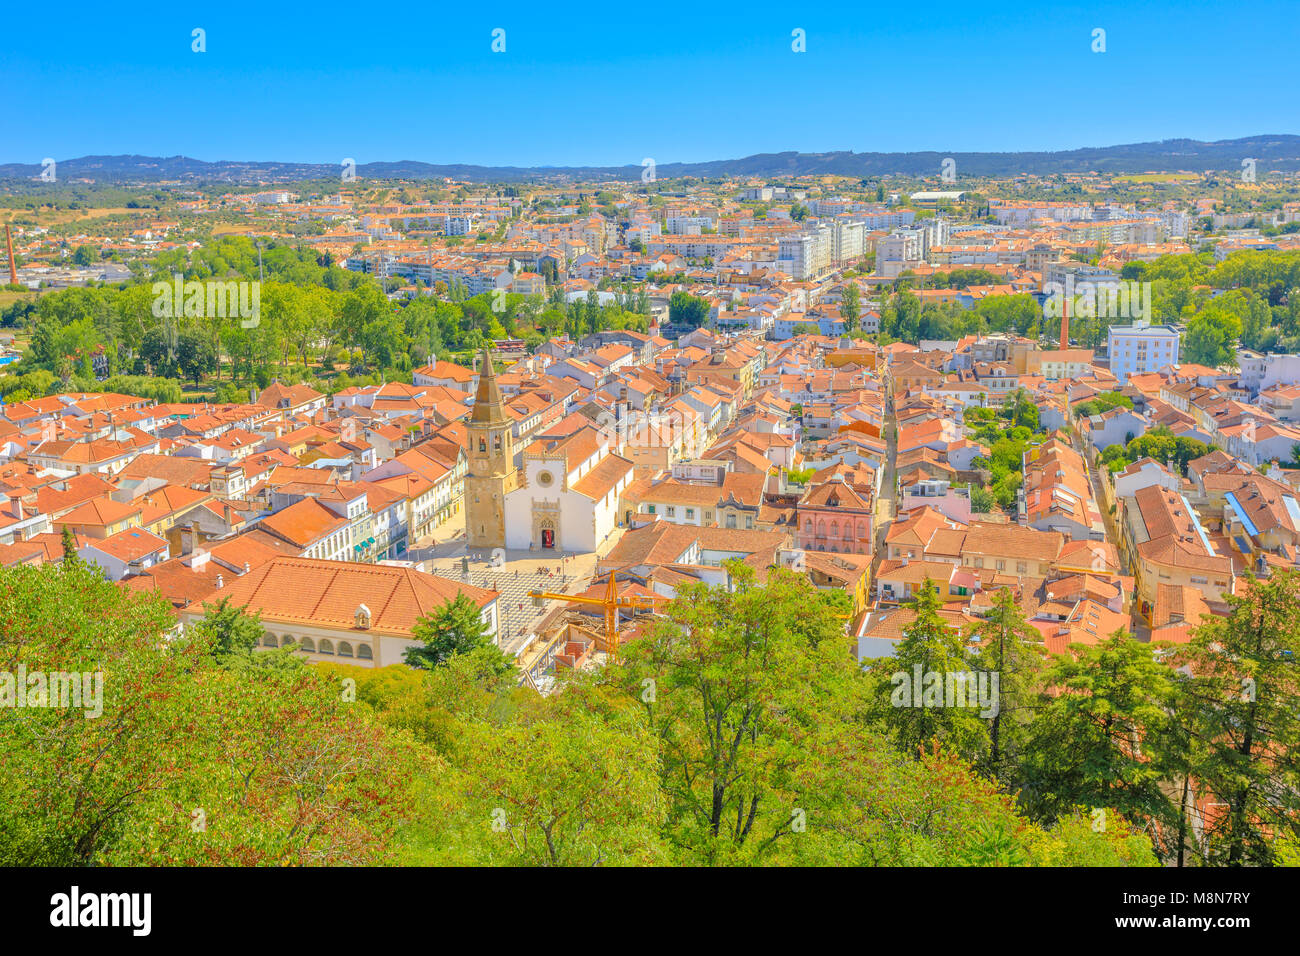 Aerial view of Tomar cityscape and Praca da Republica, the main square with Town Hall and Church of Saint John the Baptist, from Tomar Castle, Portugal, Europe. Tomar city skyline. Blue sky. Stock Photo